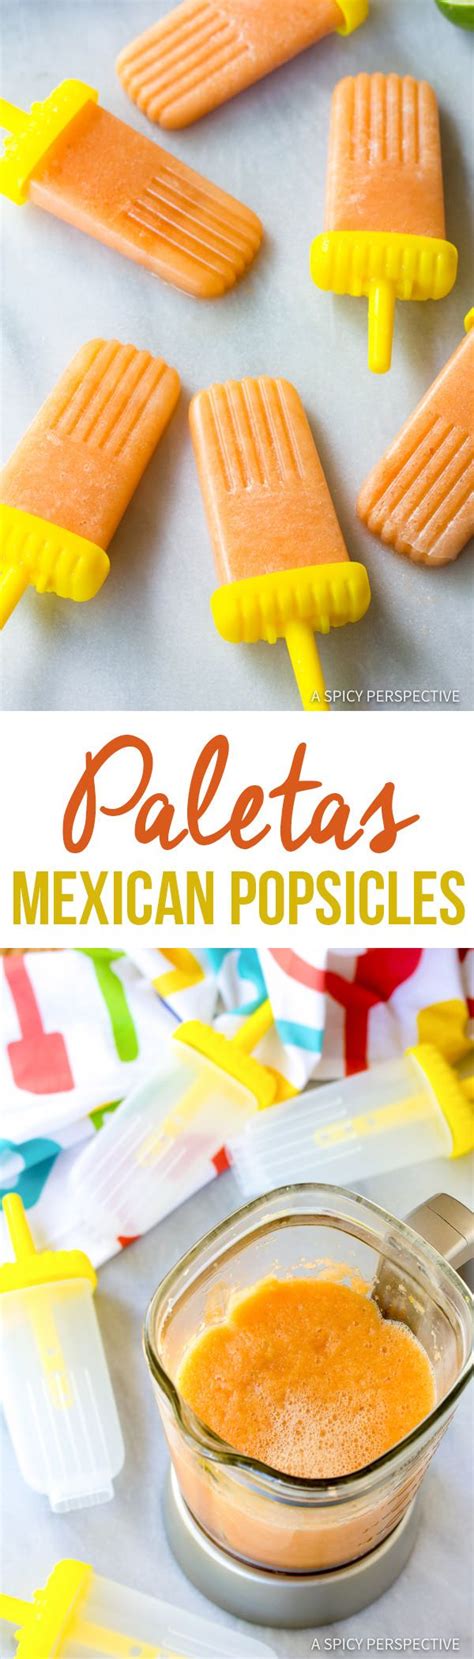 Paletas Mexican Popsicles A Spicy Perspective Healthy Popsicle